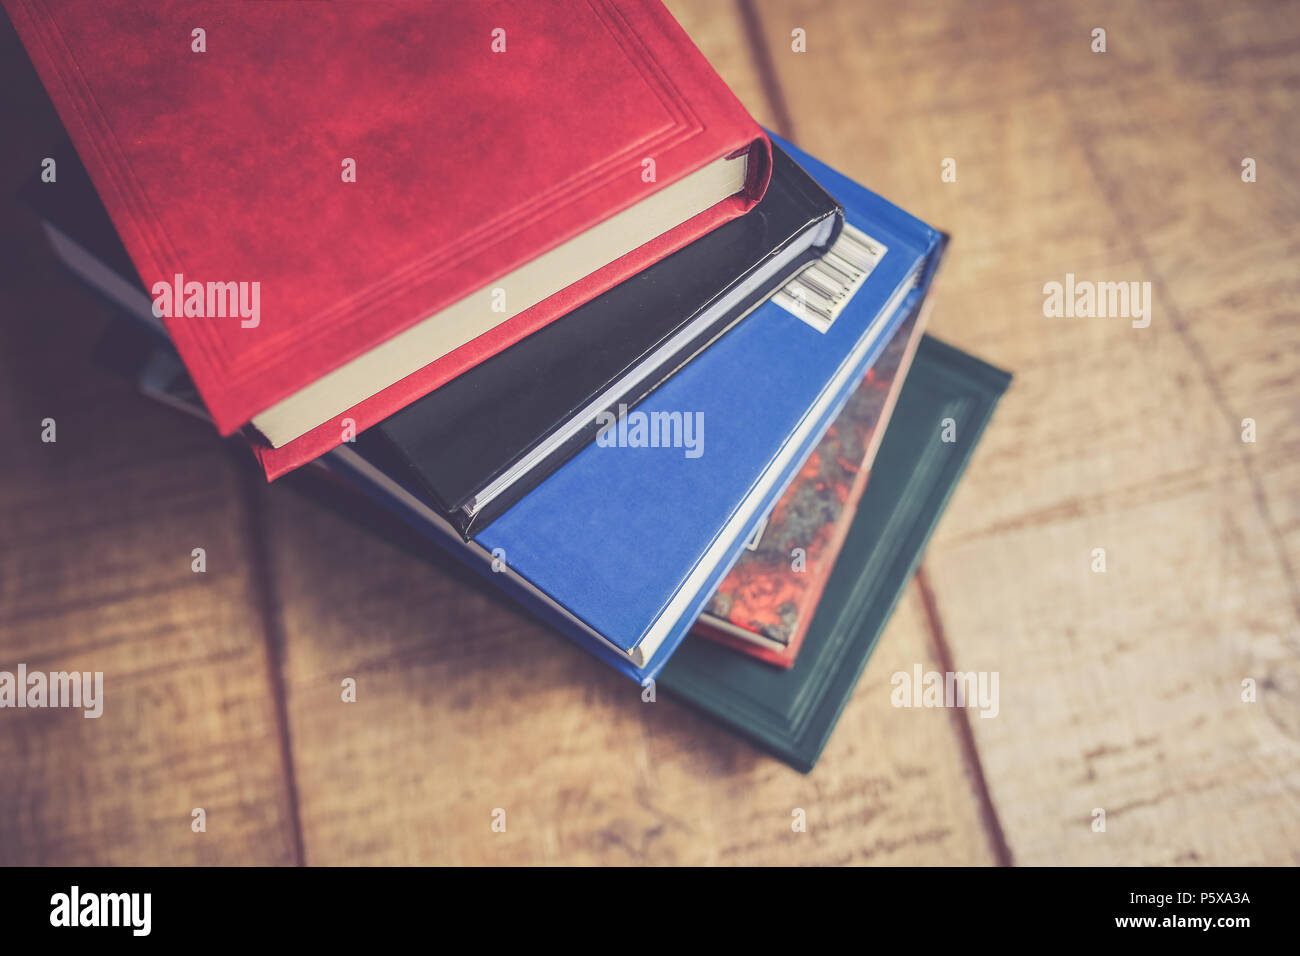 Pile of multiple color books on a wooden table Stock Photo